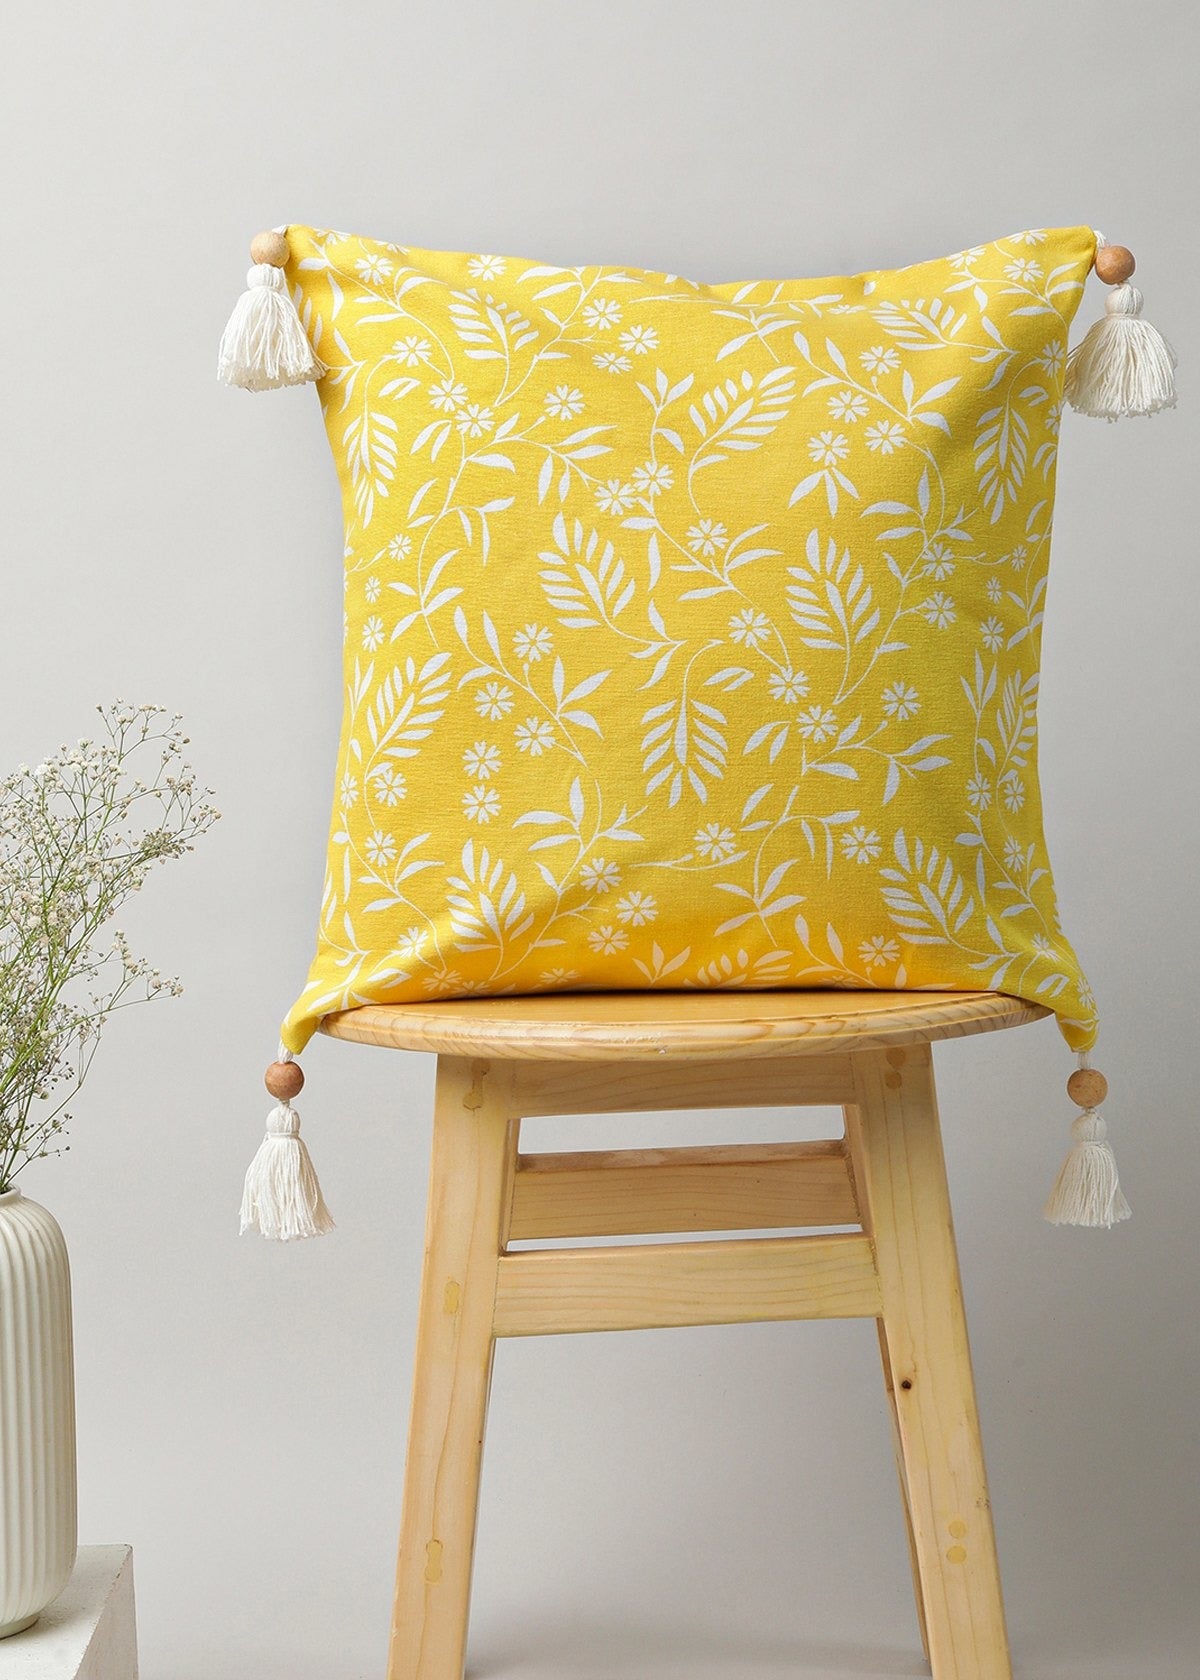 Yellow Daisy Printed Cotton Cushion Cover - Yellow